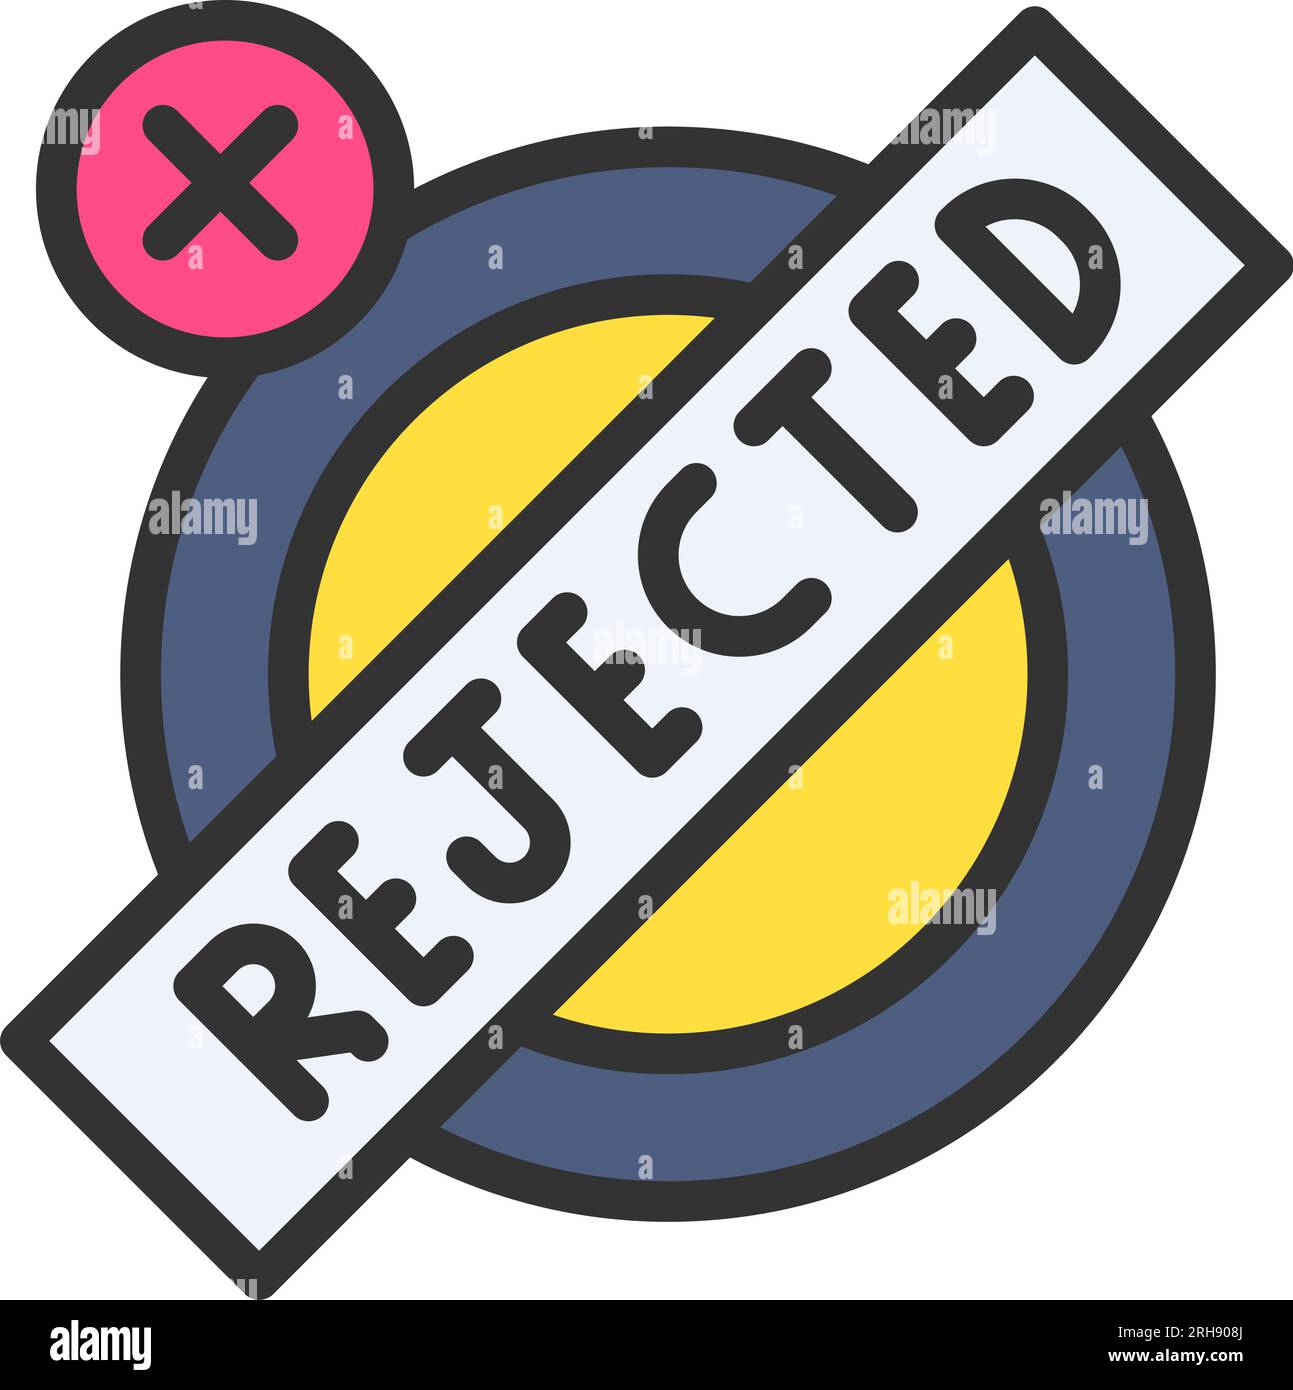 Stamp Rejected Icon Image. Stock Vector